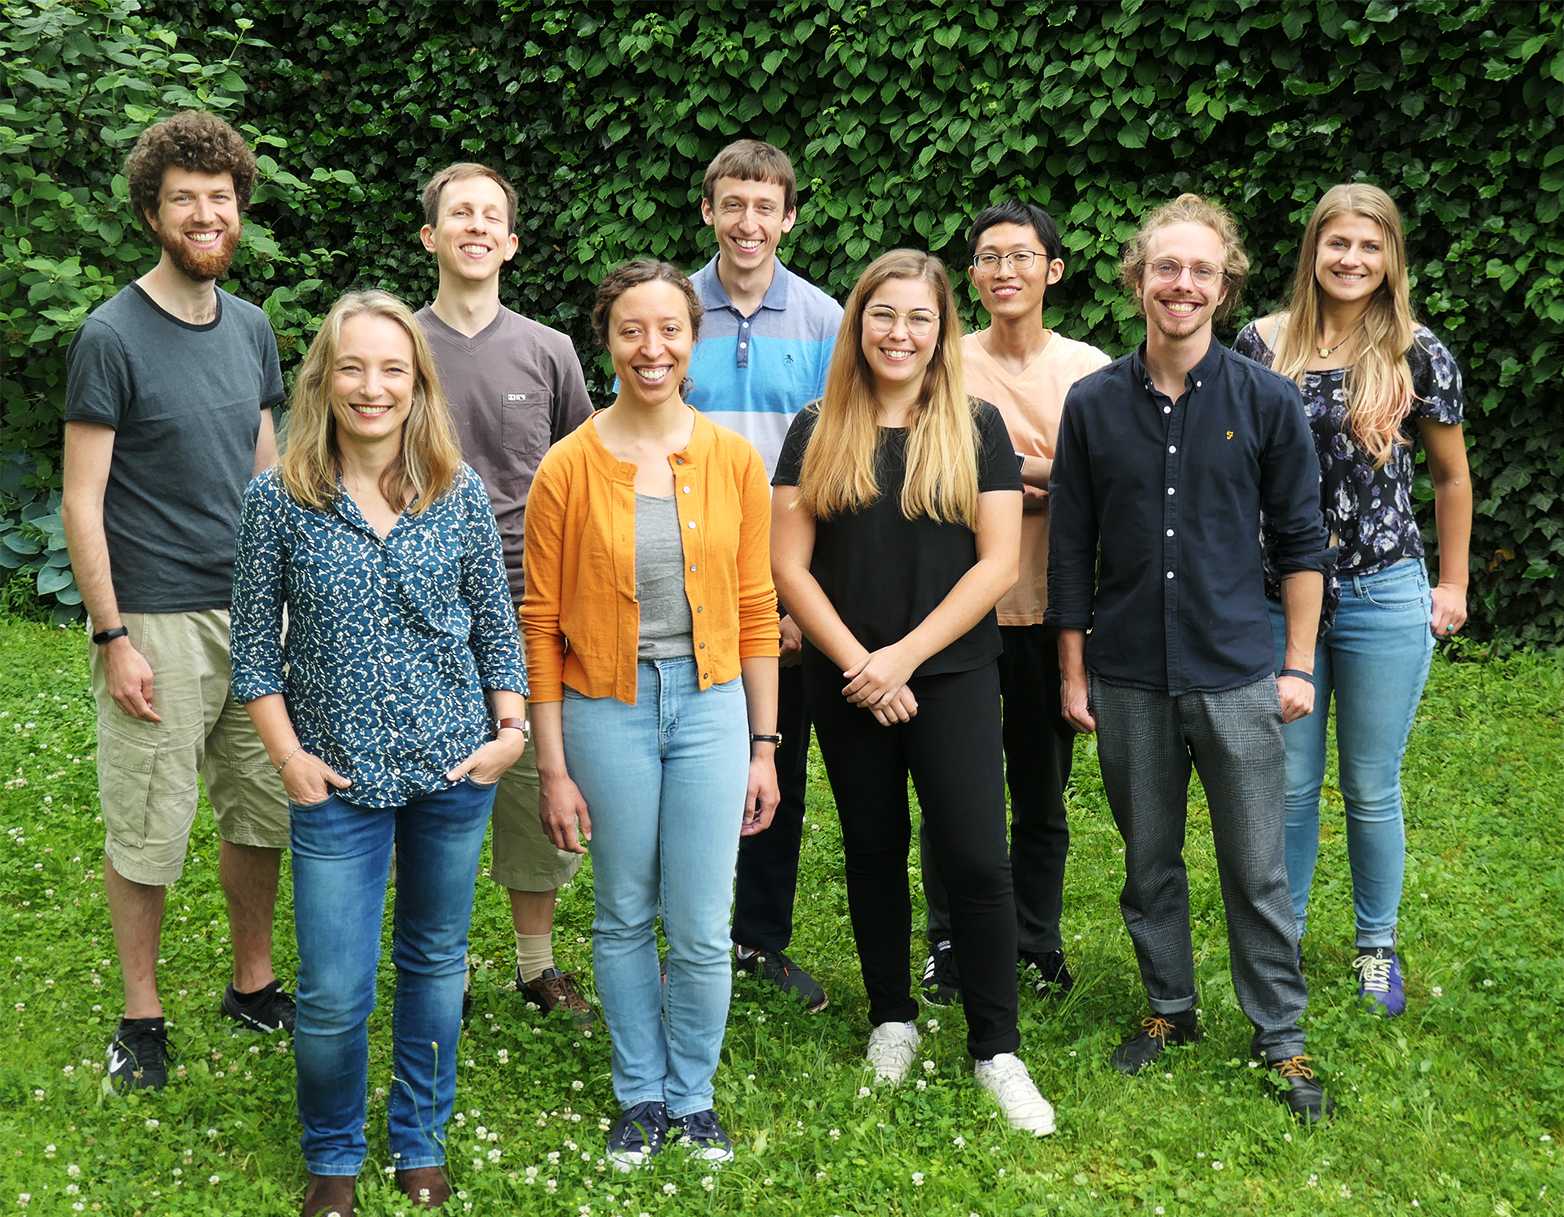 Enlarged view: Group picture from 2019